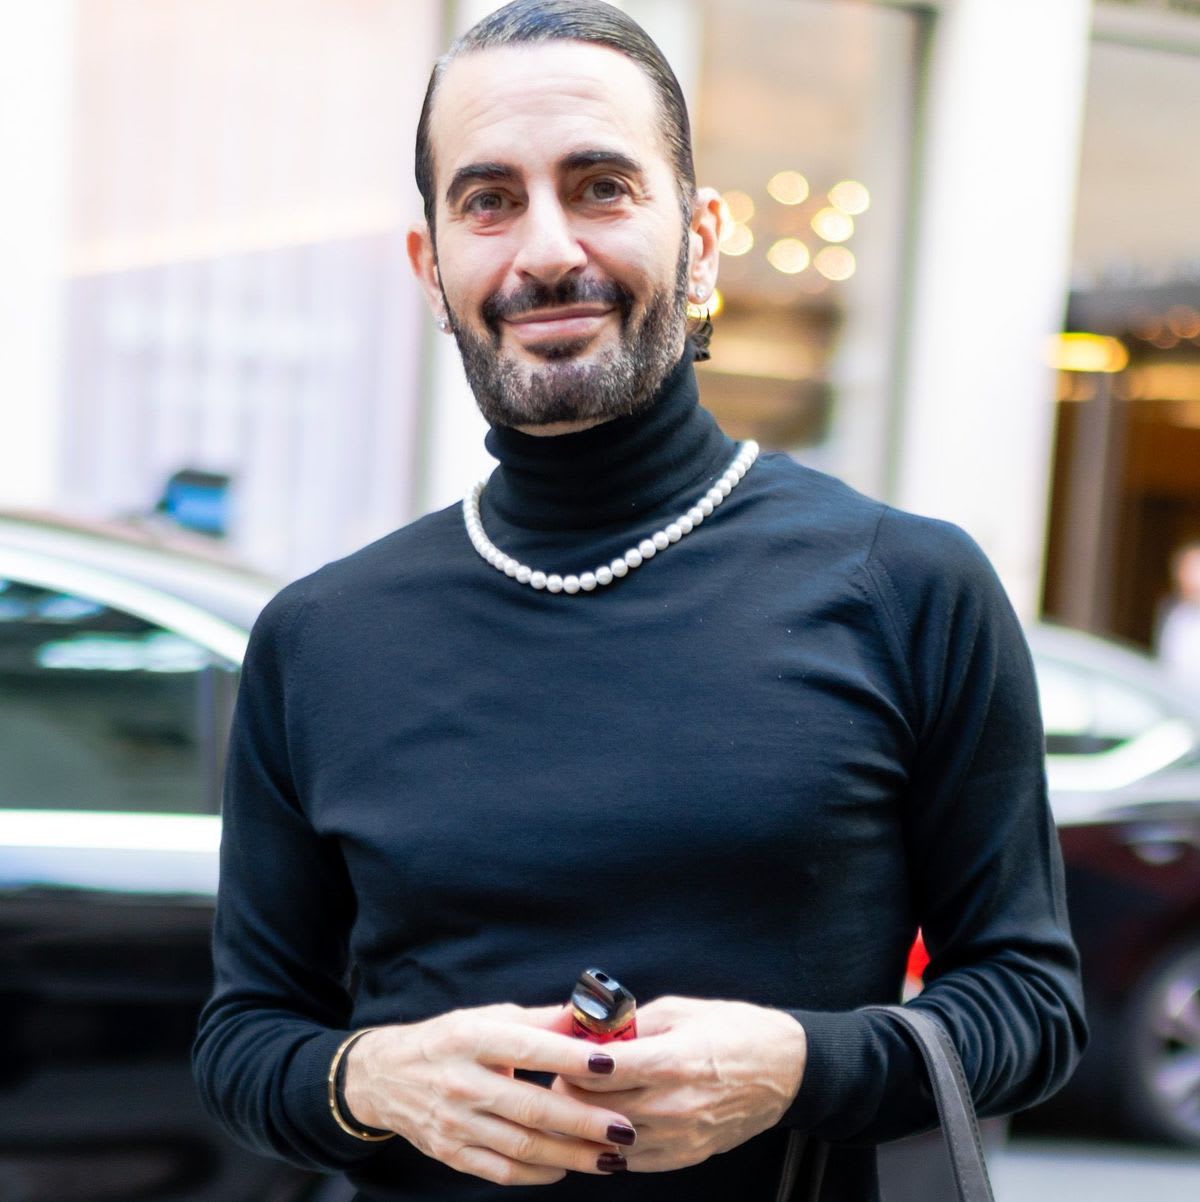 Marc Jacobs and his innovative creations for Louis Vuitton